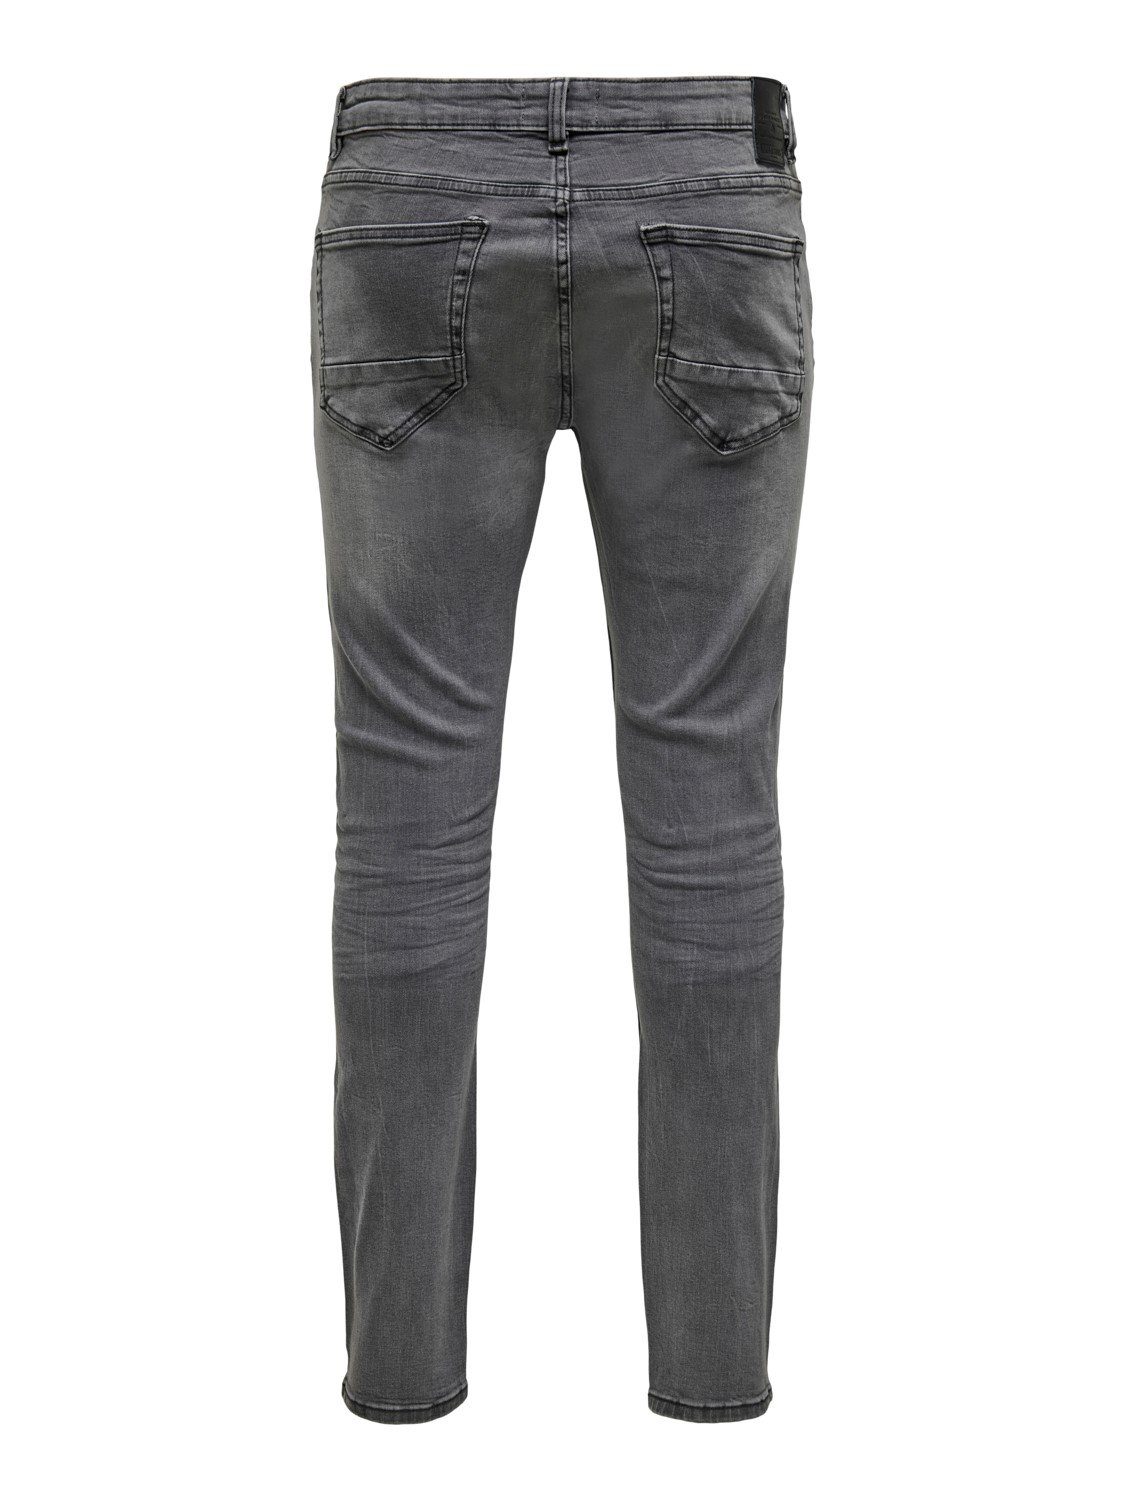 ONSWARP & Stoned Denim in Pants Jeans Skinny Basic (1-tlg) ONLY Fit Hose Grau 3977 SONS Slim-fit-Jeans Washed